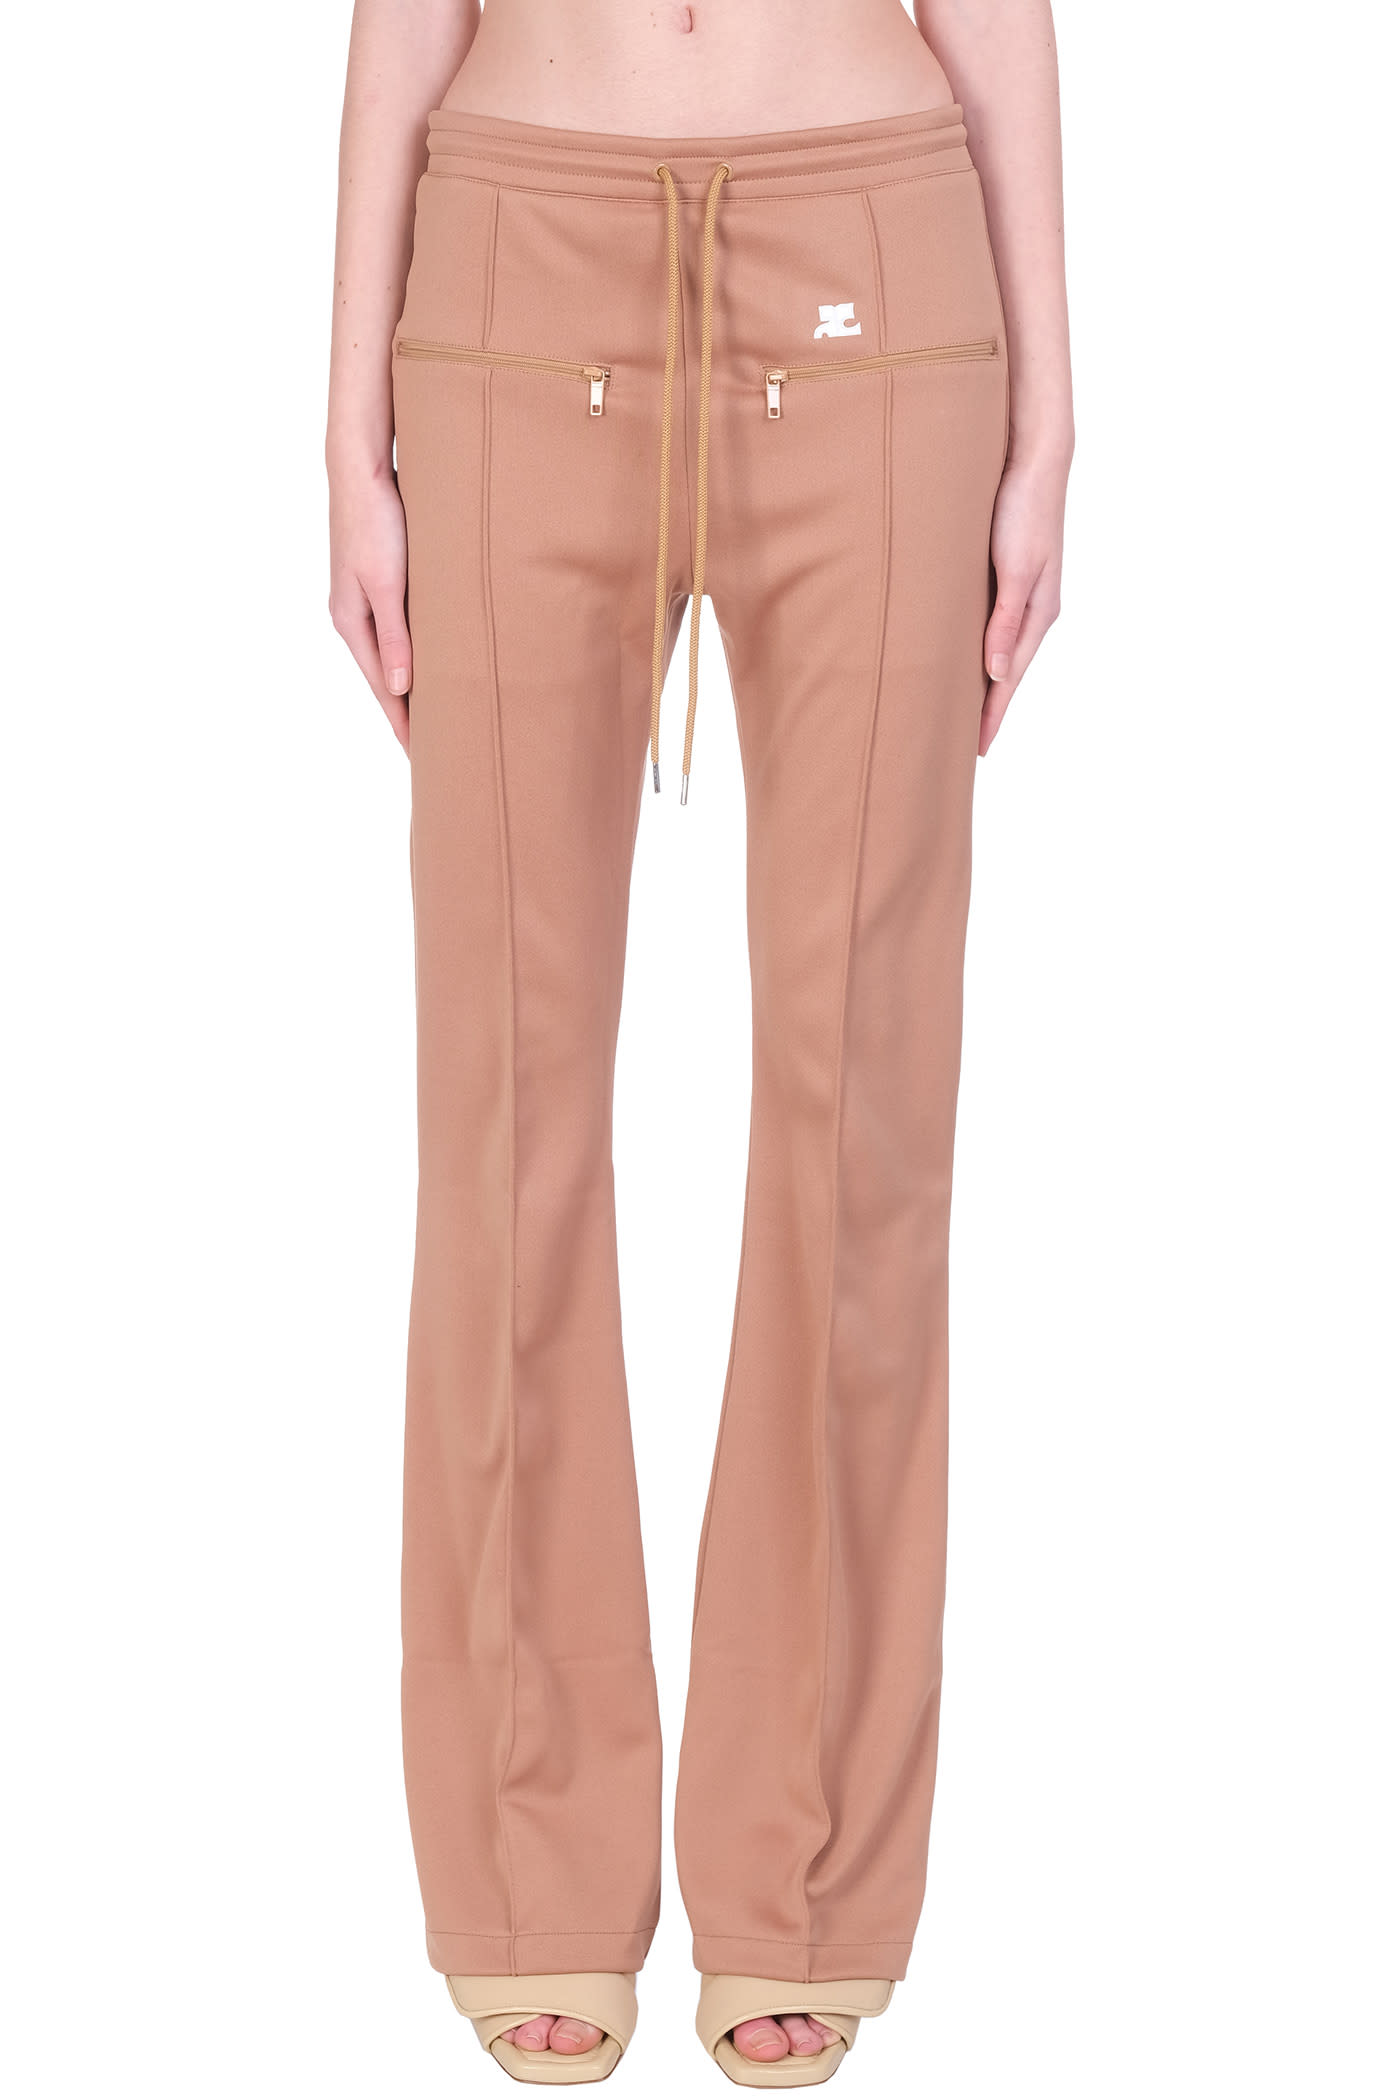 Courrèges Pants In Beige Polyester